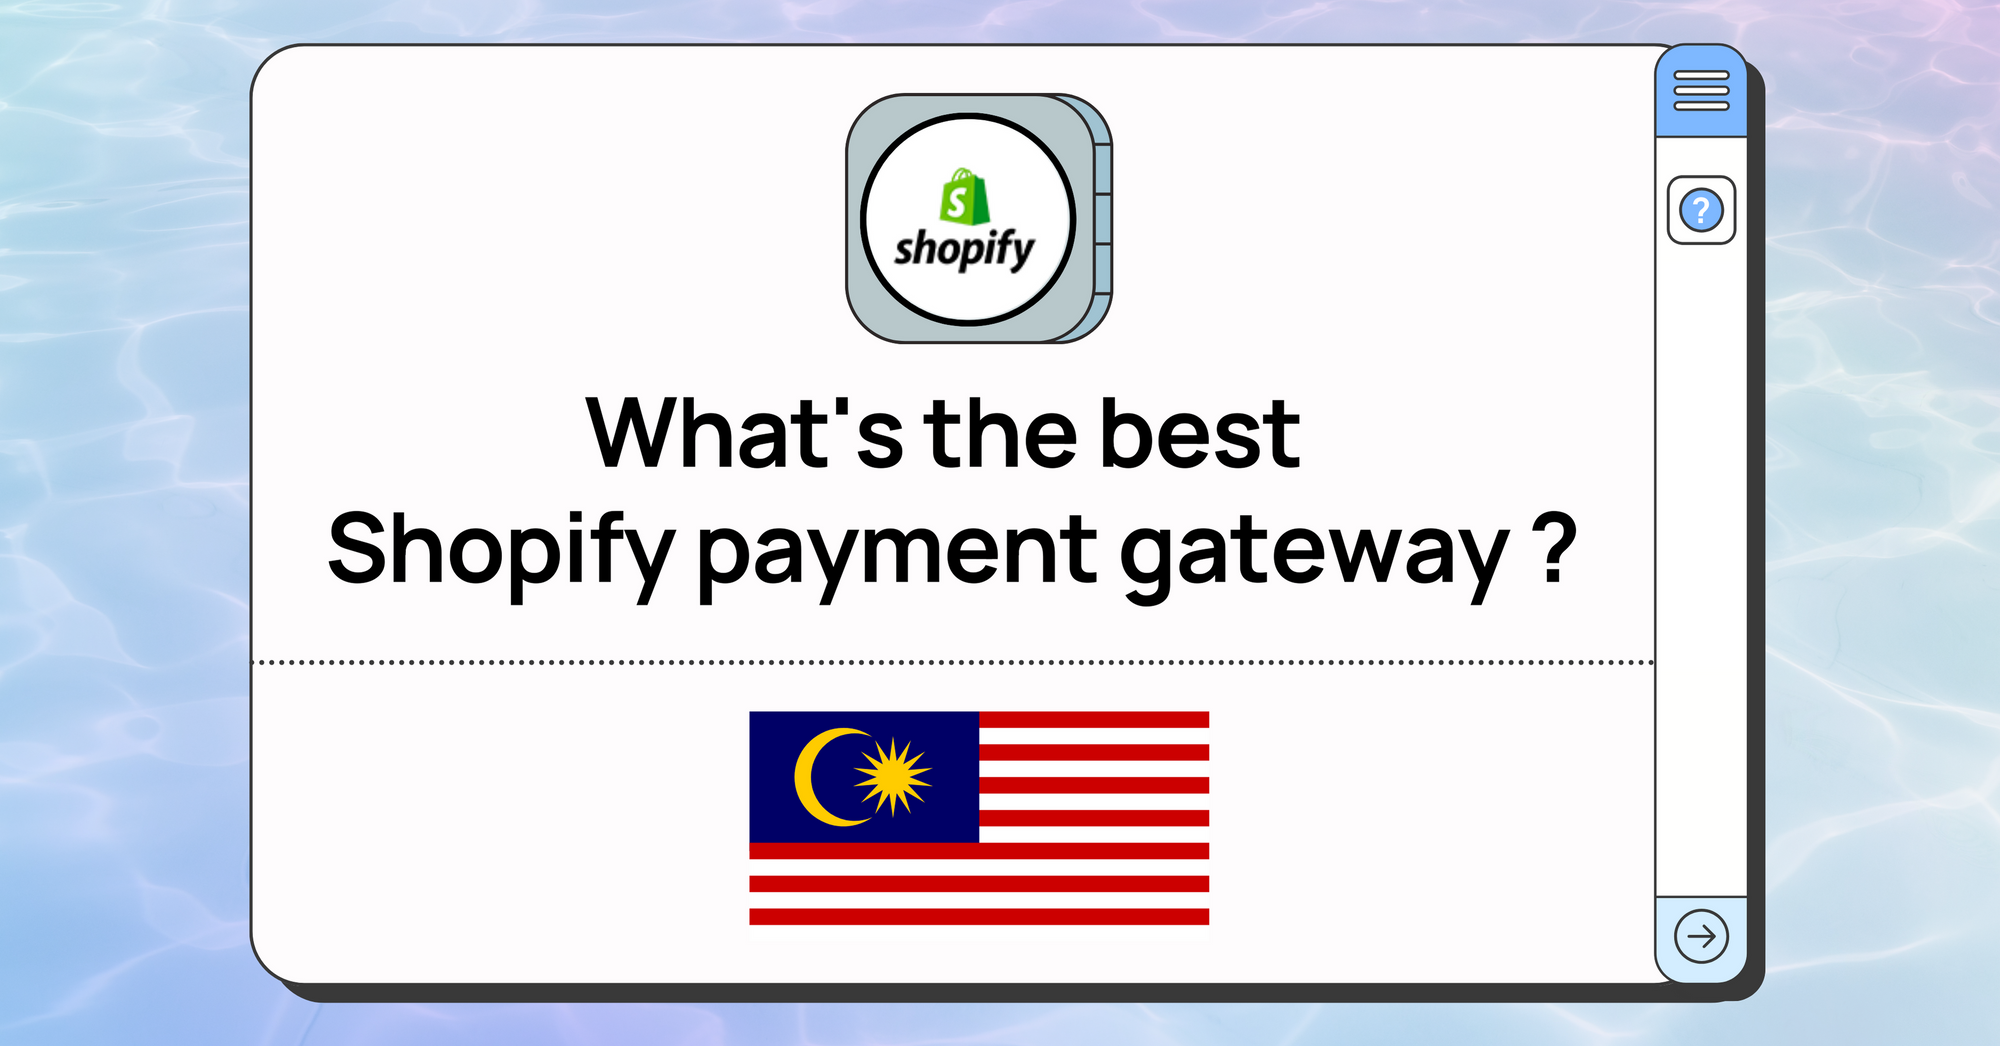 What's the best Shopify payment gateway in Malaysia?